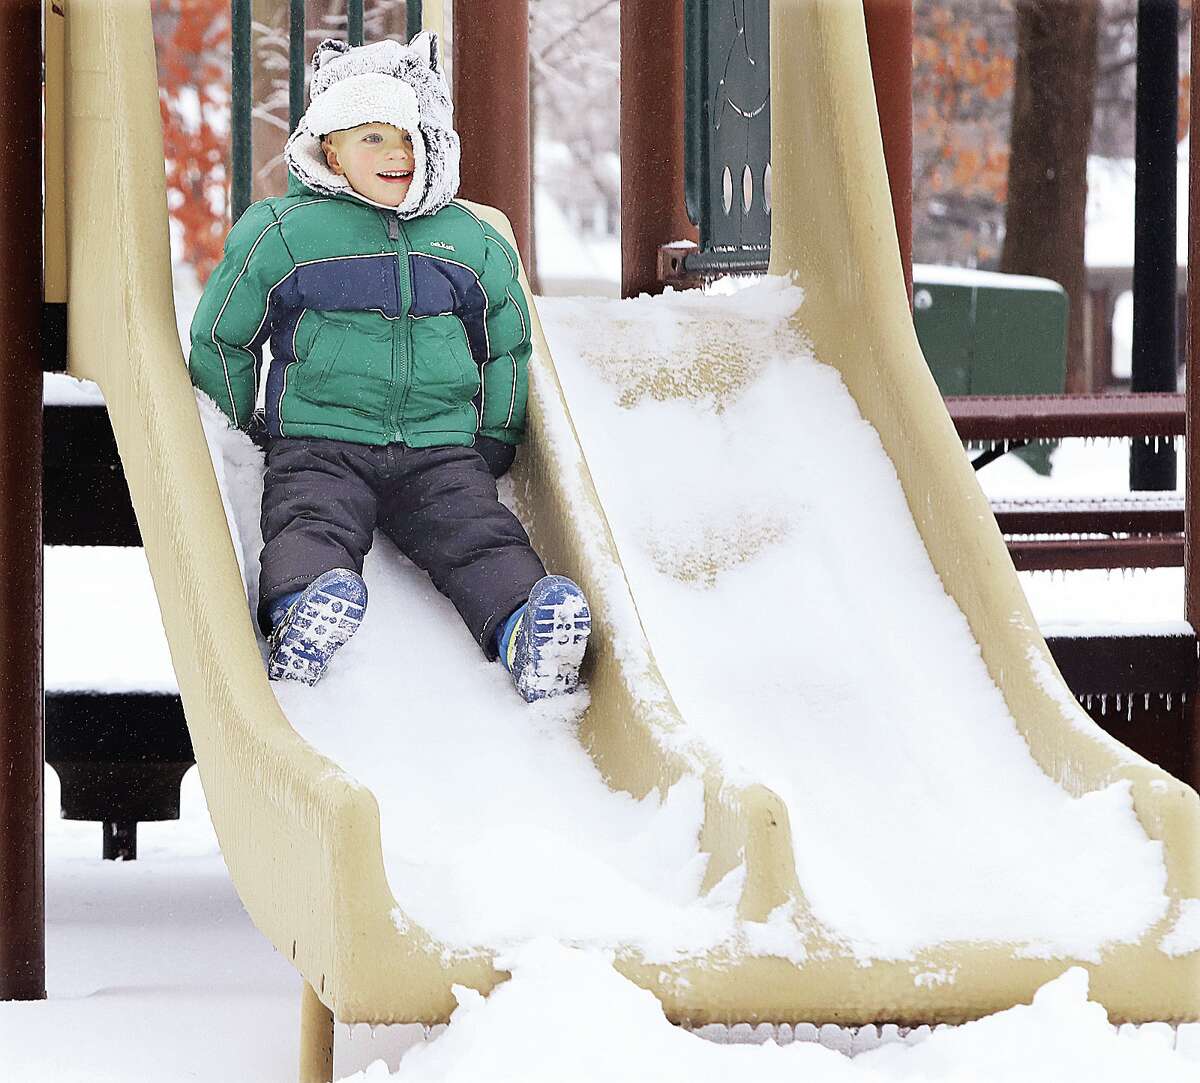 Jack Spohr, 3, of Edwardsville, seemed to really enjoy riding down the snow covered playground slide at Leclaire Park.